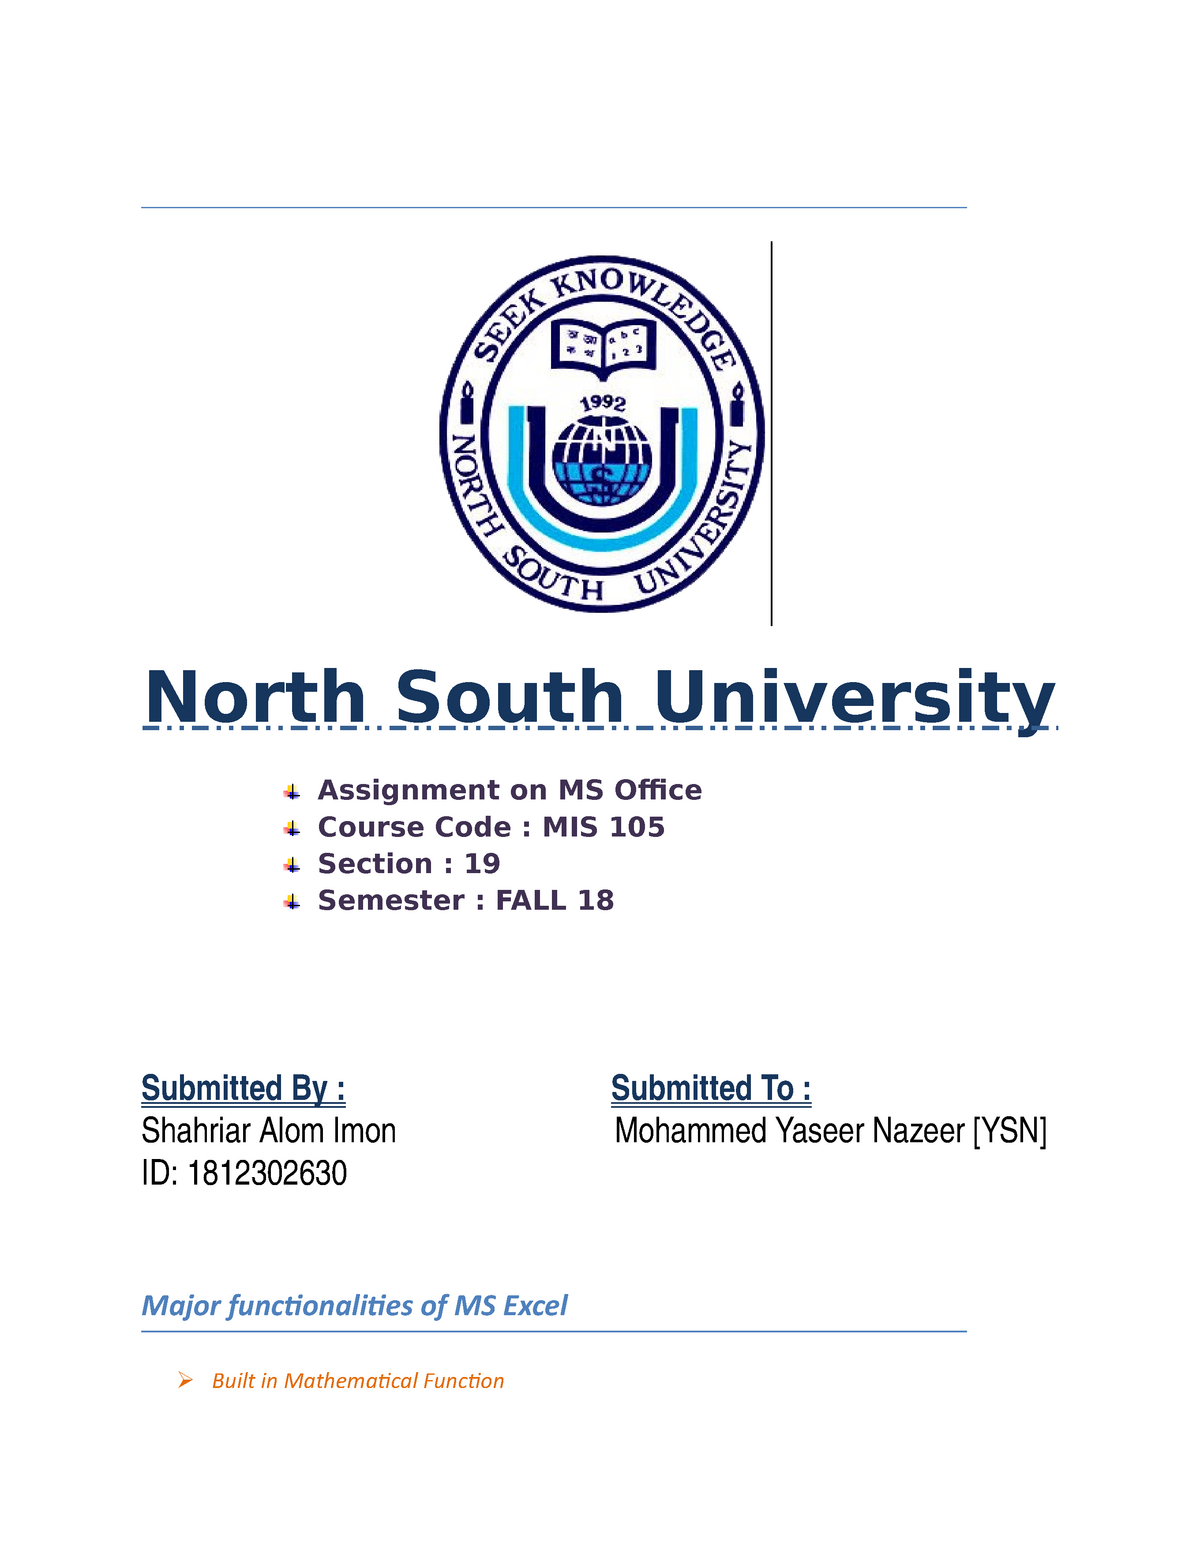 assignment cover page nsu